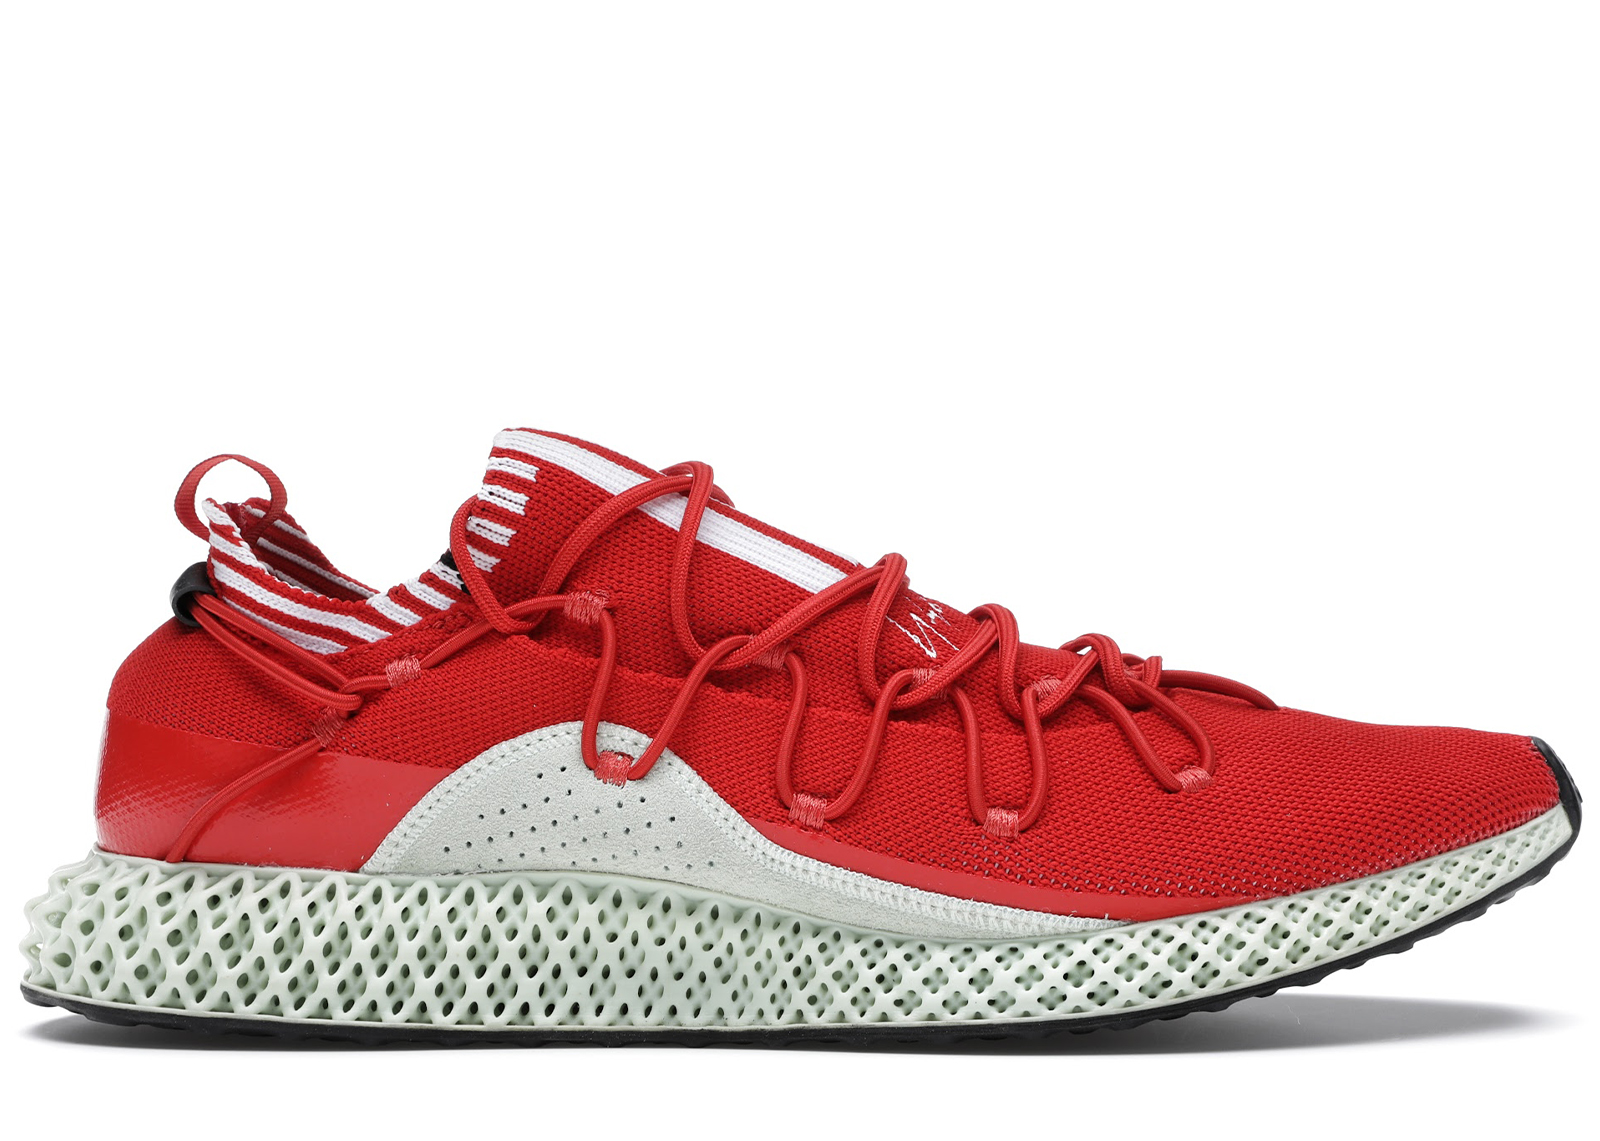 adidas Y3 Runner 4D Red